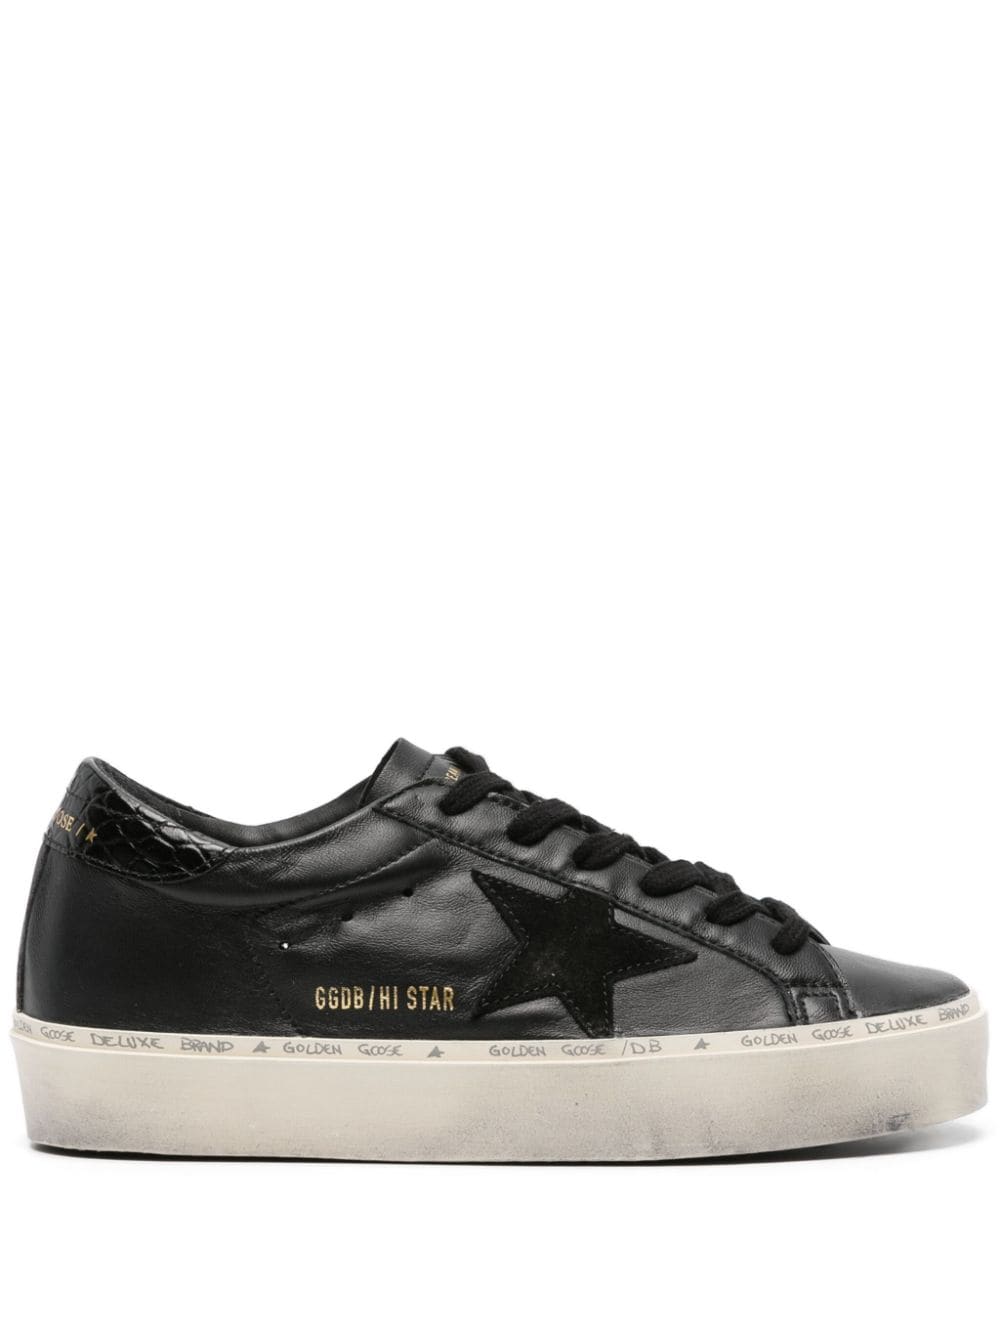 Golden Goose Purestar Leather Trainers In Black